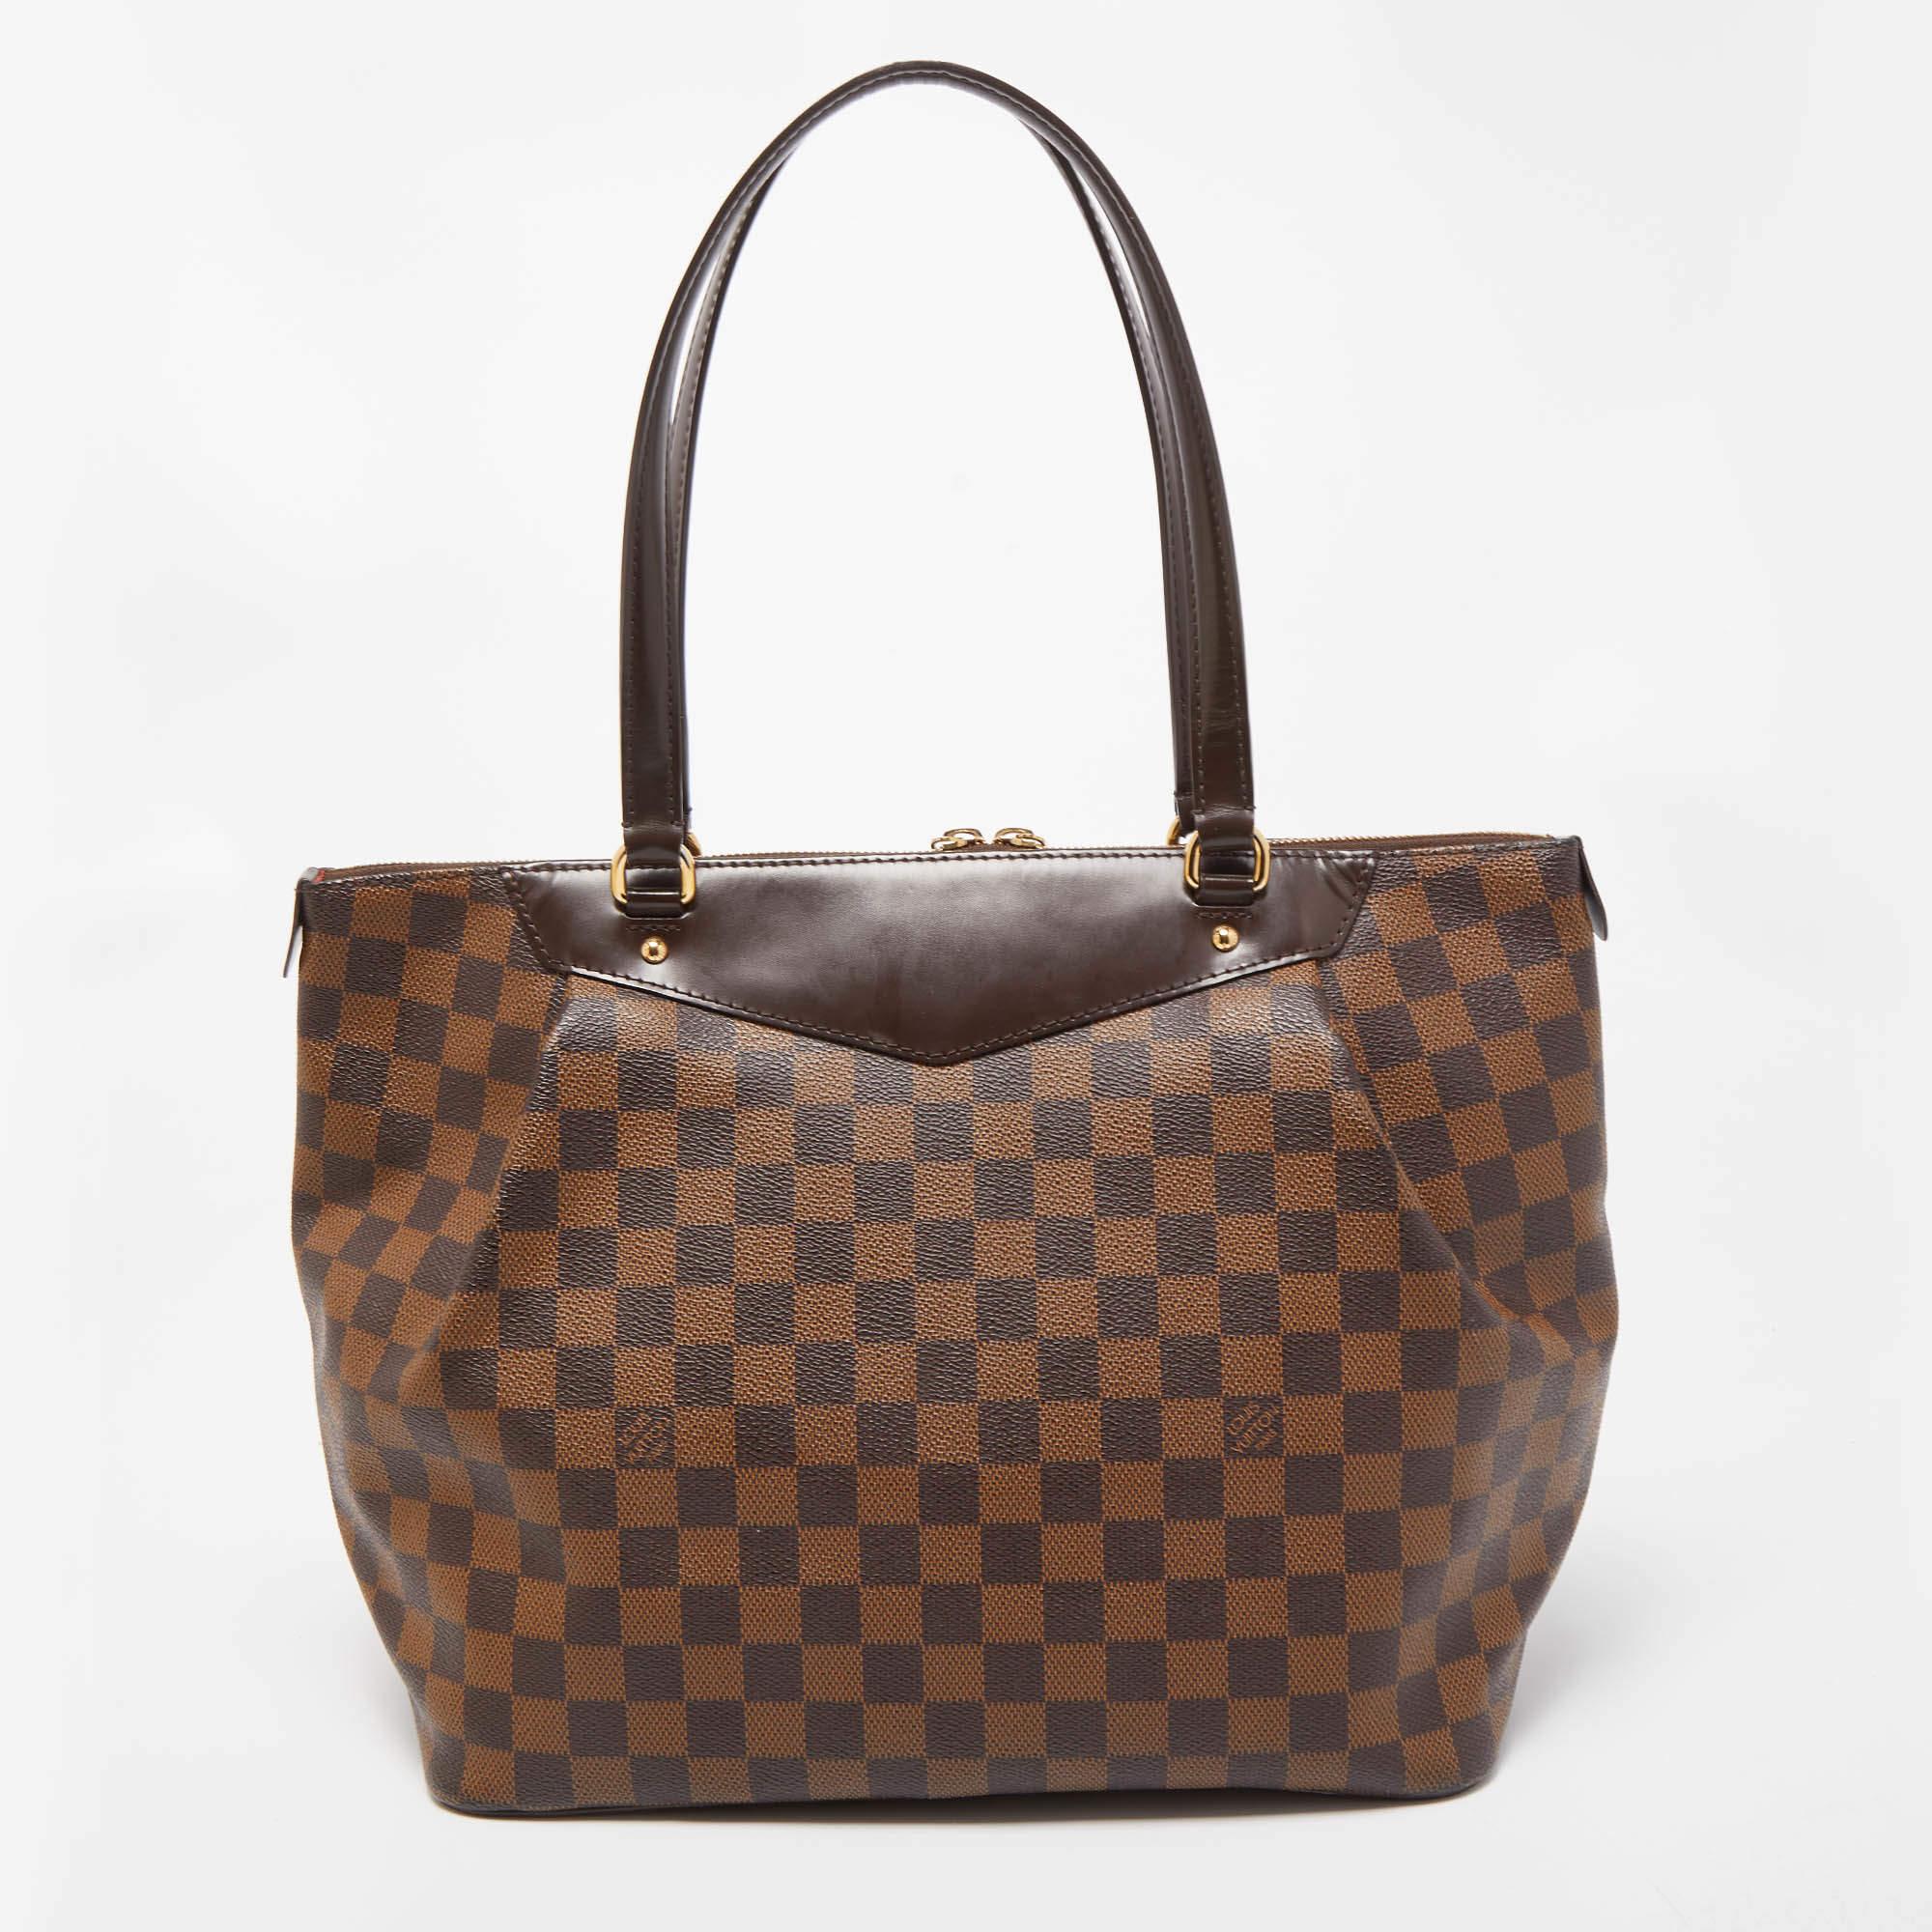 Louis Vuitton's handbags are popular for their style, durability, and functionality. This Westminister bag, like all the other designs, is long-lasting and truly fashionable. It is made from Damier Ebene canvas and leather on the exterior with